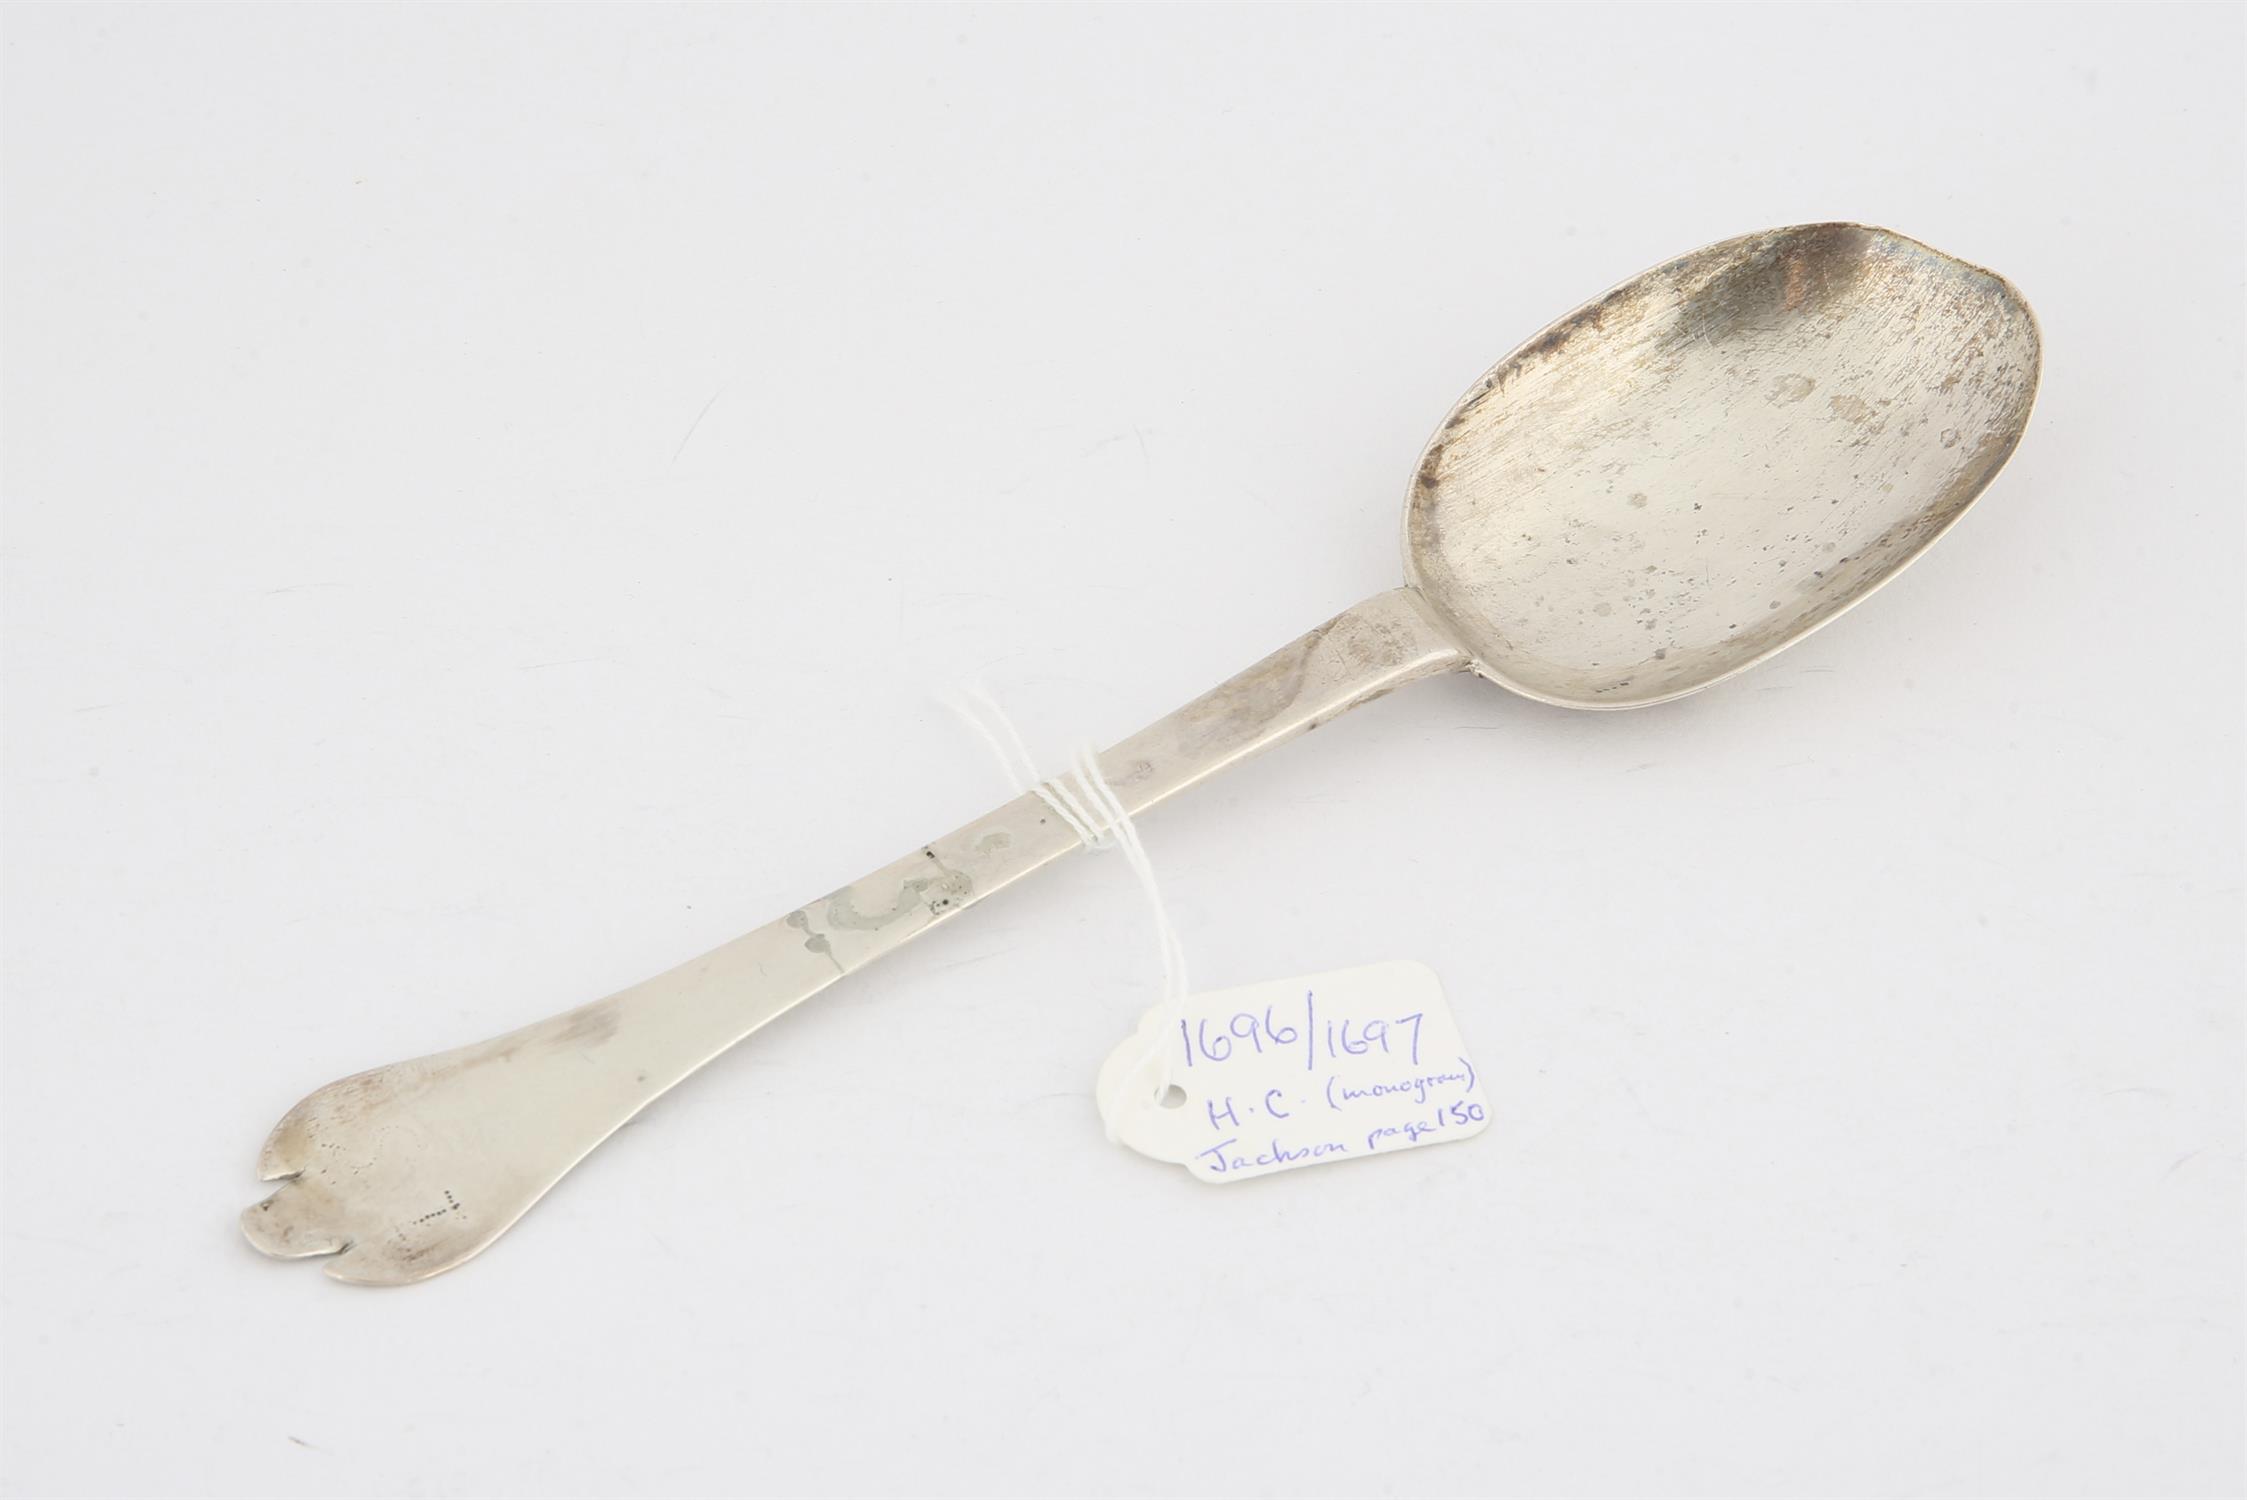 Late 17th century trifid end silver spoon SILVER COLLECTION OF SIR RAY TINDLE CBE DL